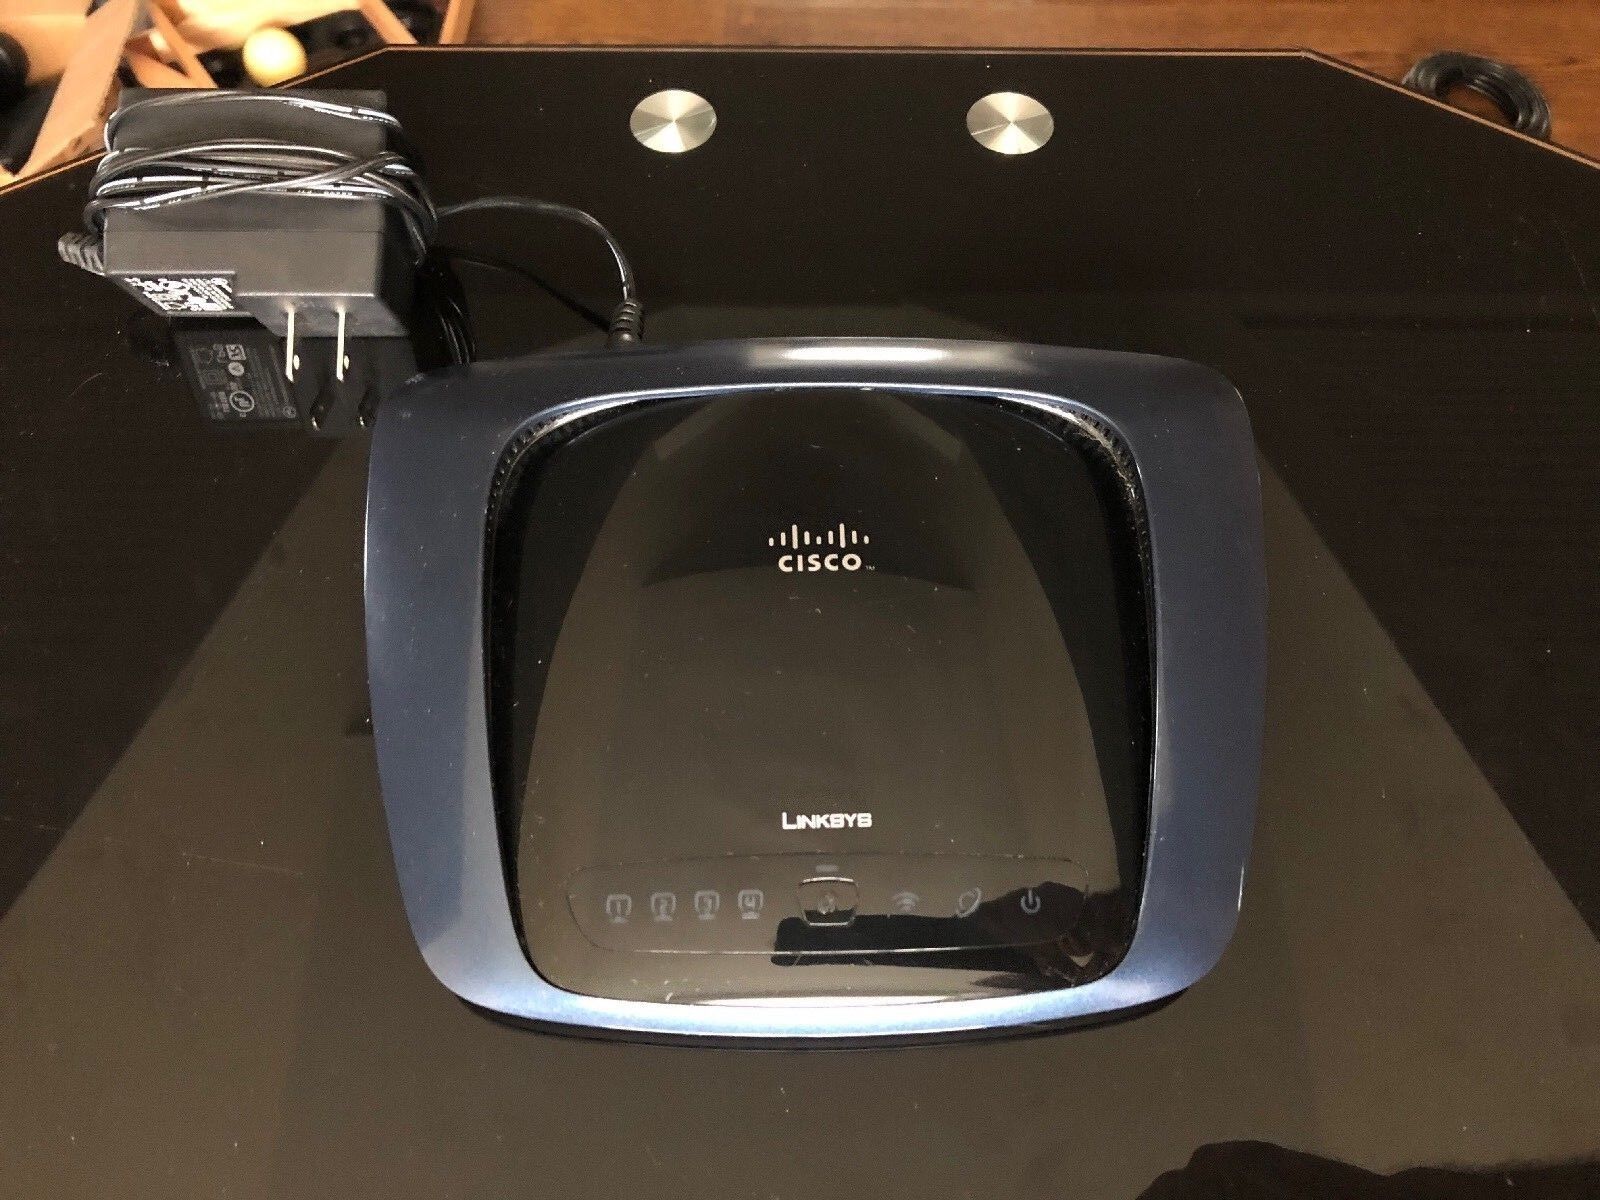 CISCO LINKSYS Wireless N Broadband Router WRT160N V2 Perfect Working Condition